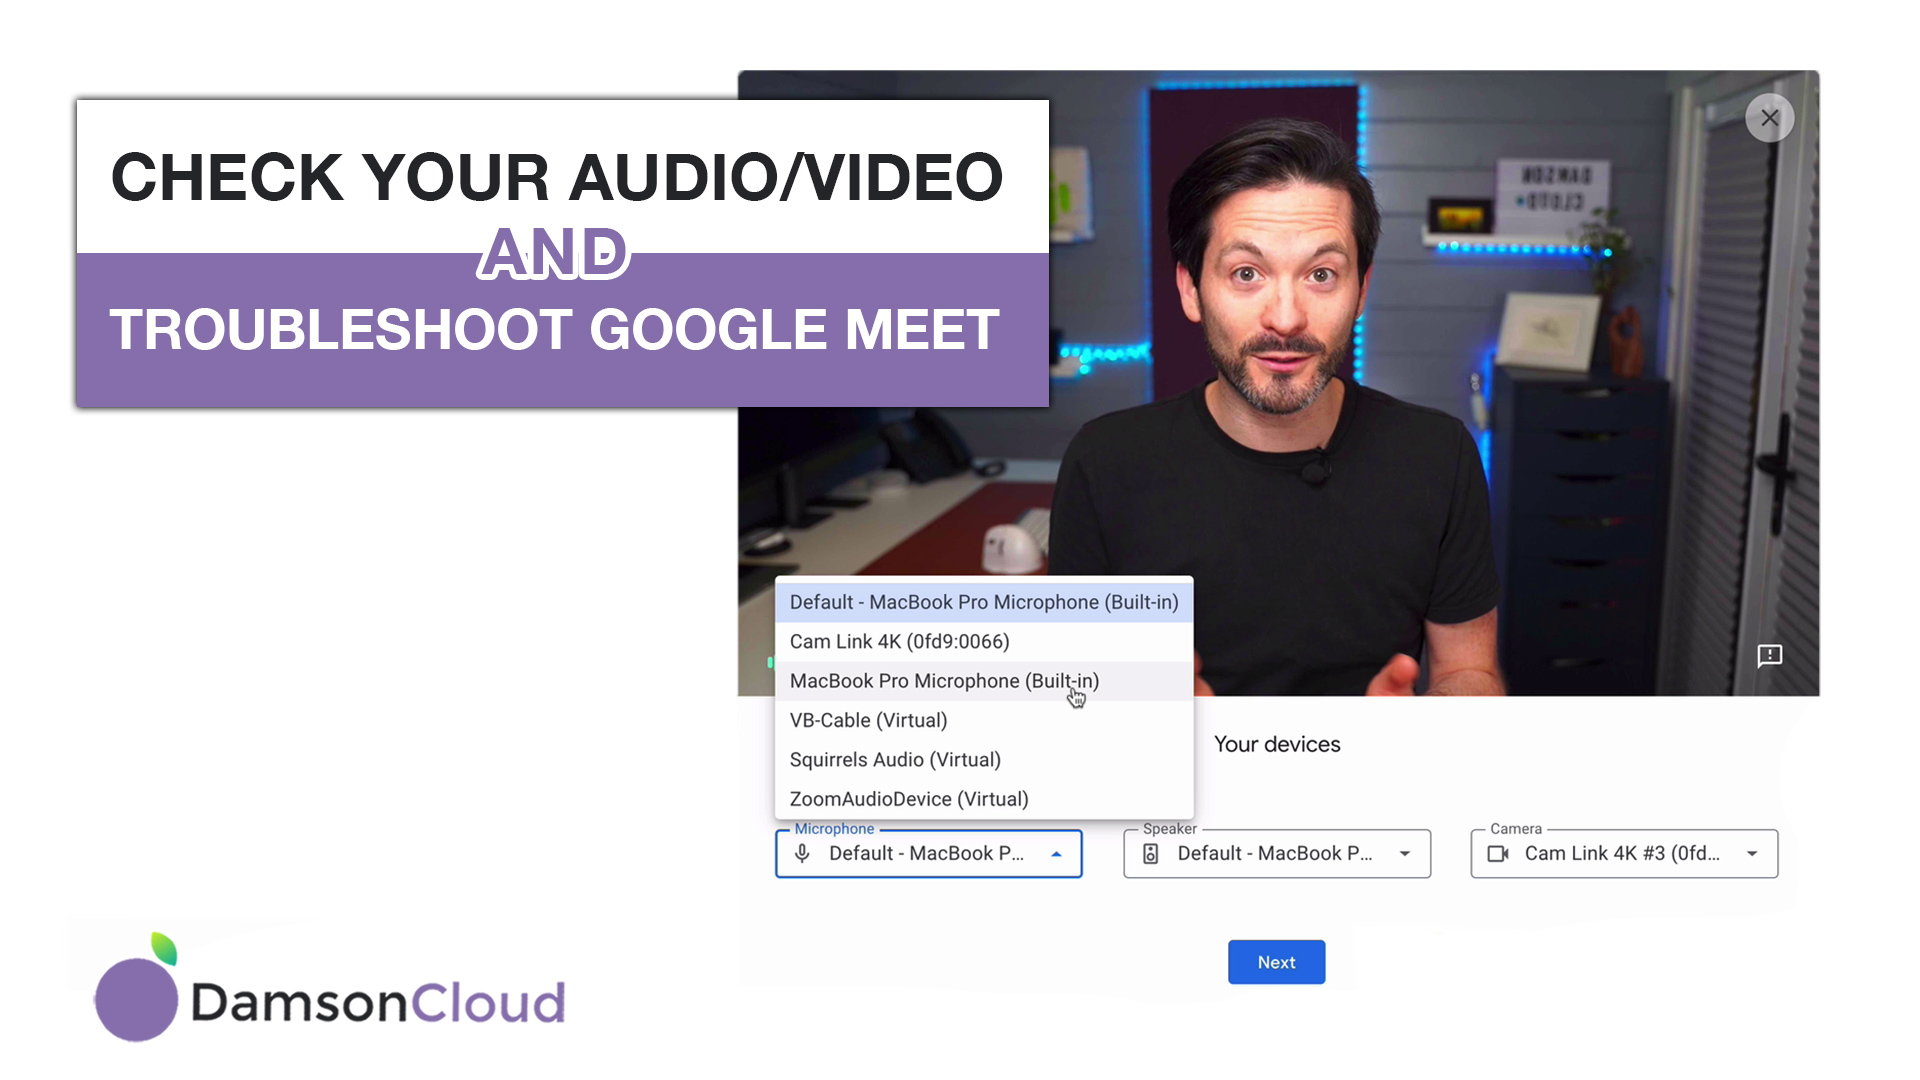 Check Your Audio/Video and Troubleshoot on Google Meet